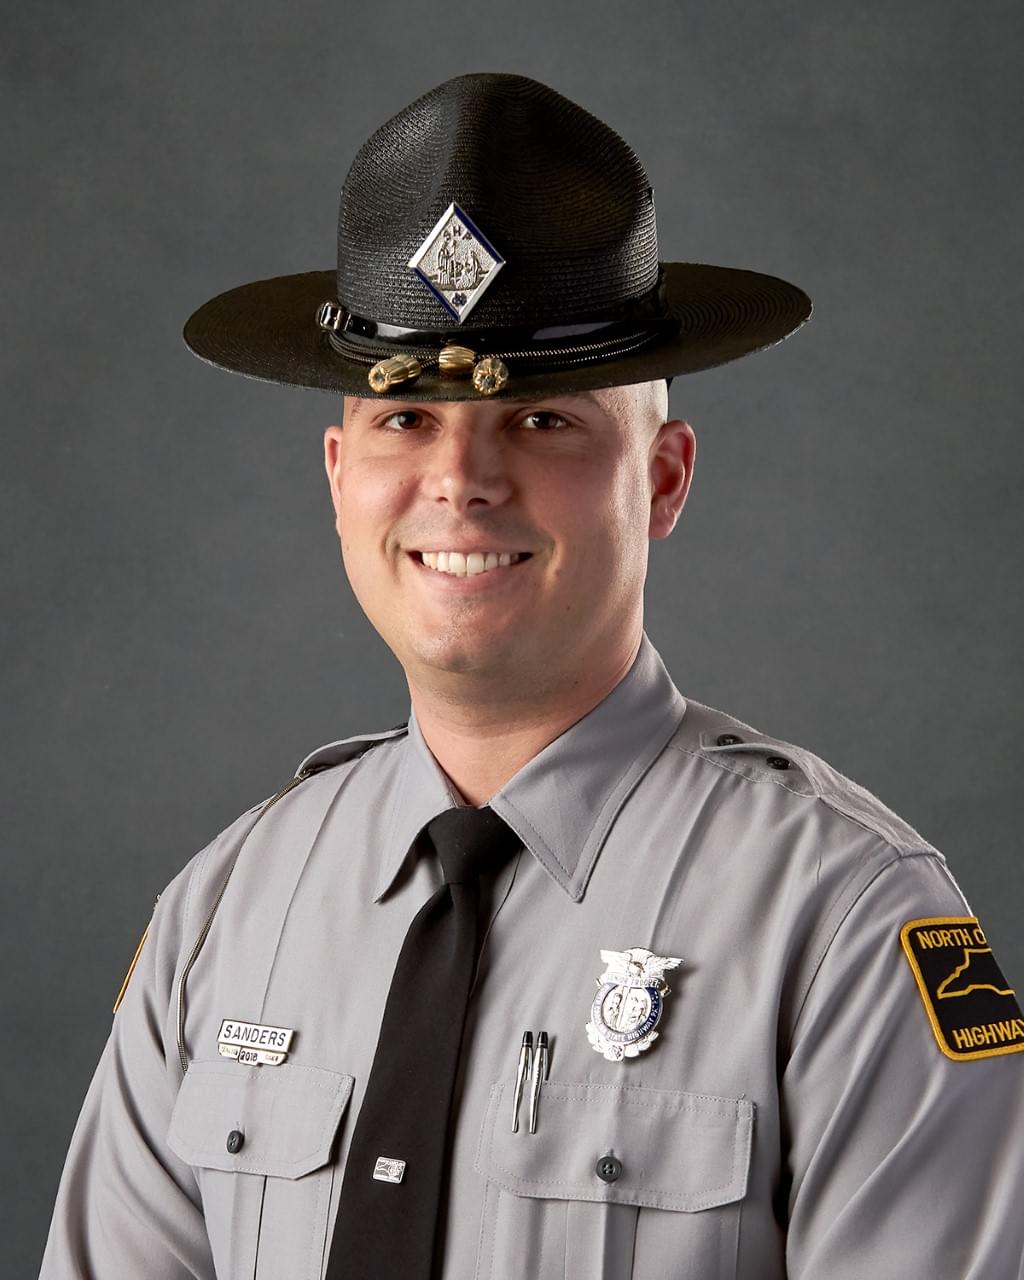 Commissioners Ask To Name Bridge After Fallen State Trooper